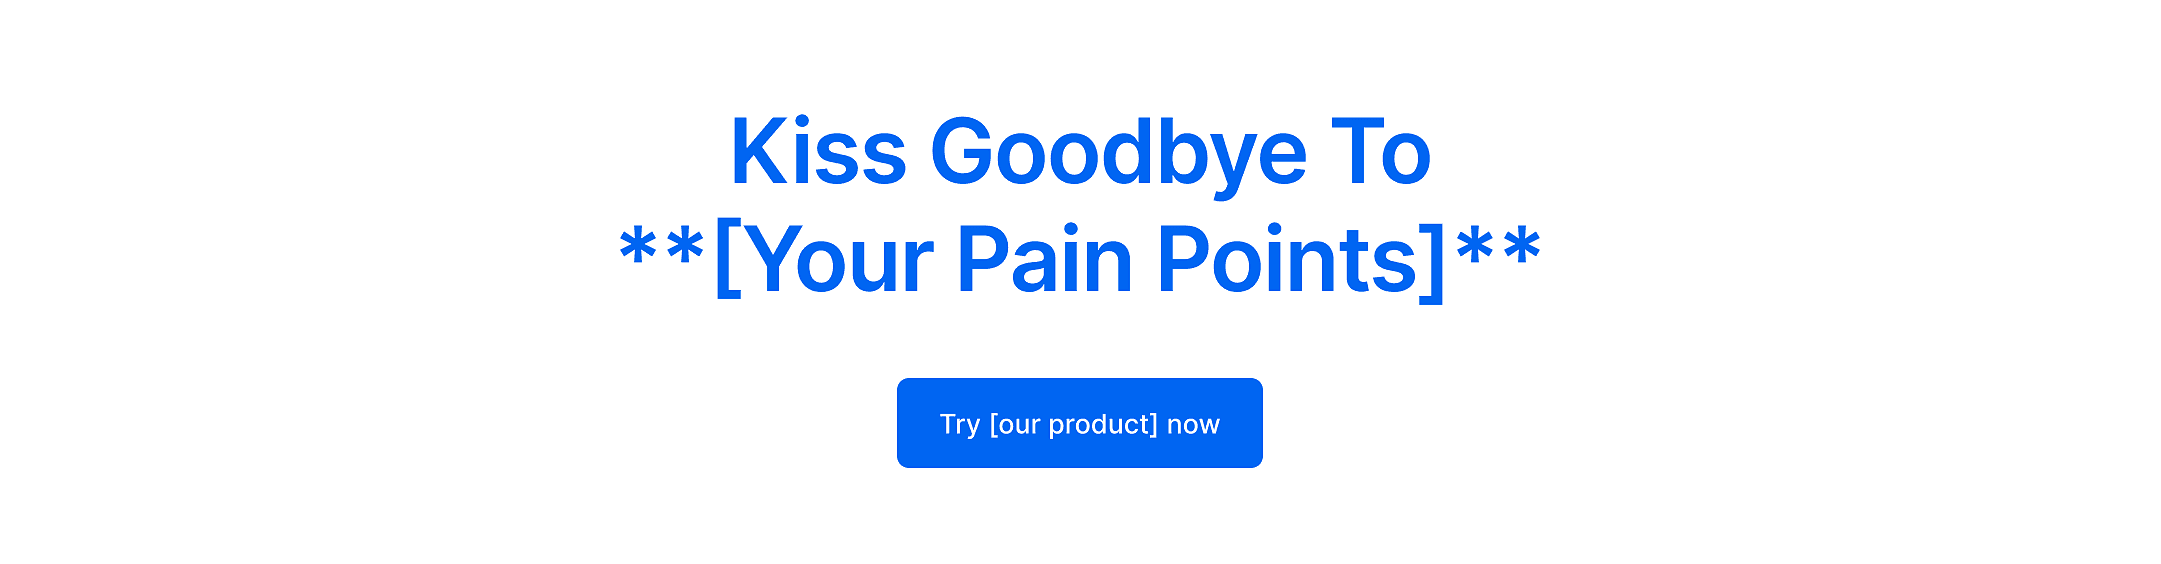 Blueprint of kiss goodbye to your pain points